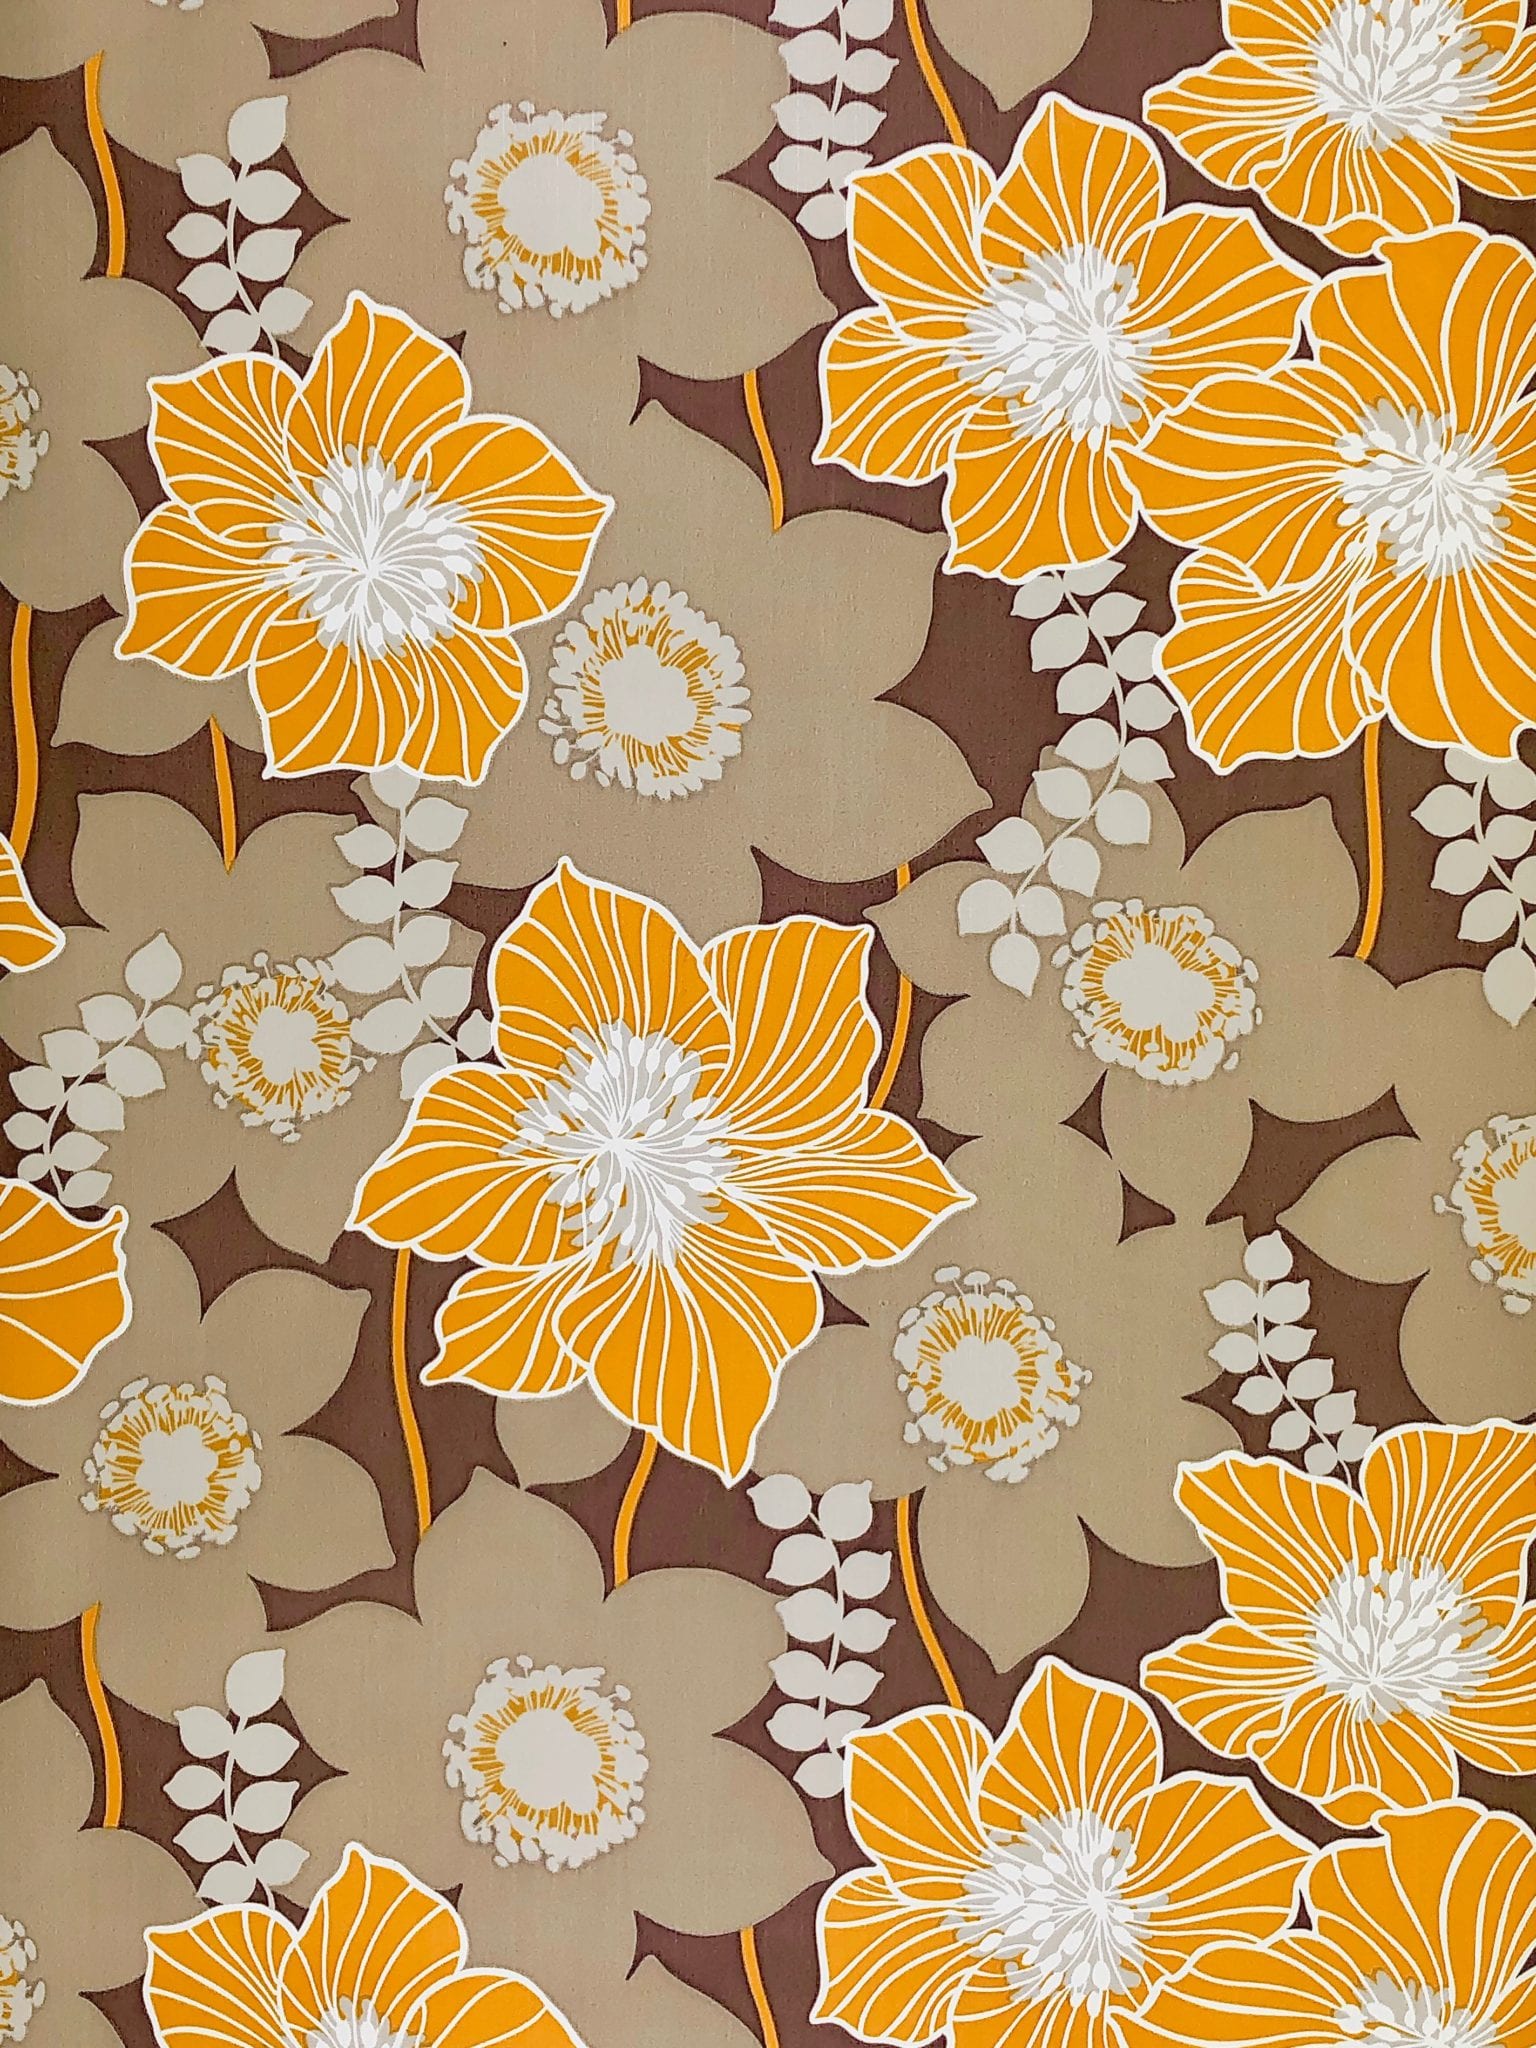 70s Floral Fabric Wallpaper and Home Decor  Spoonflower